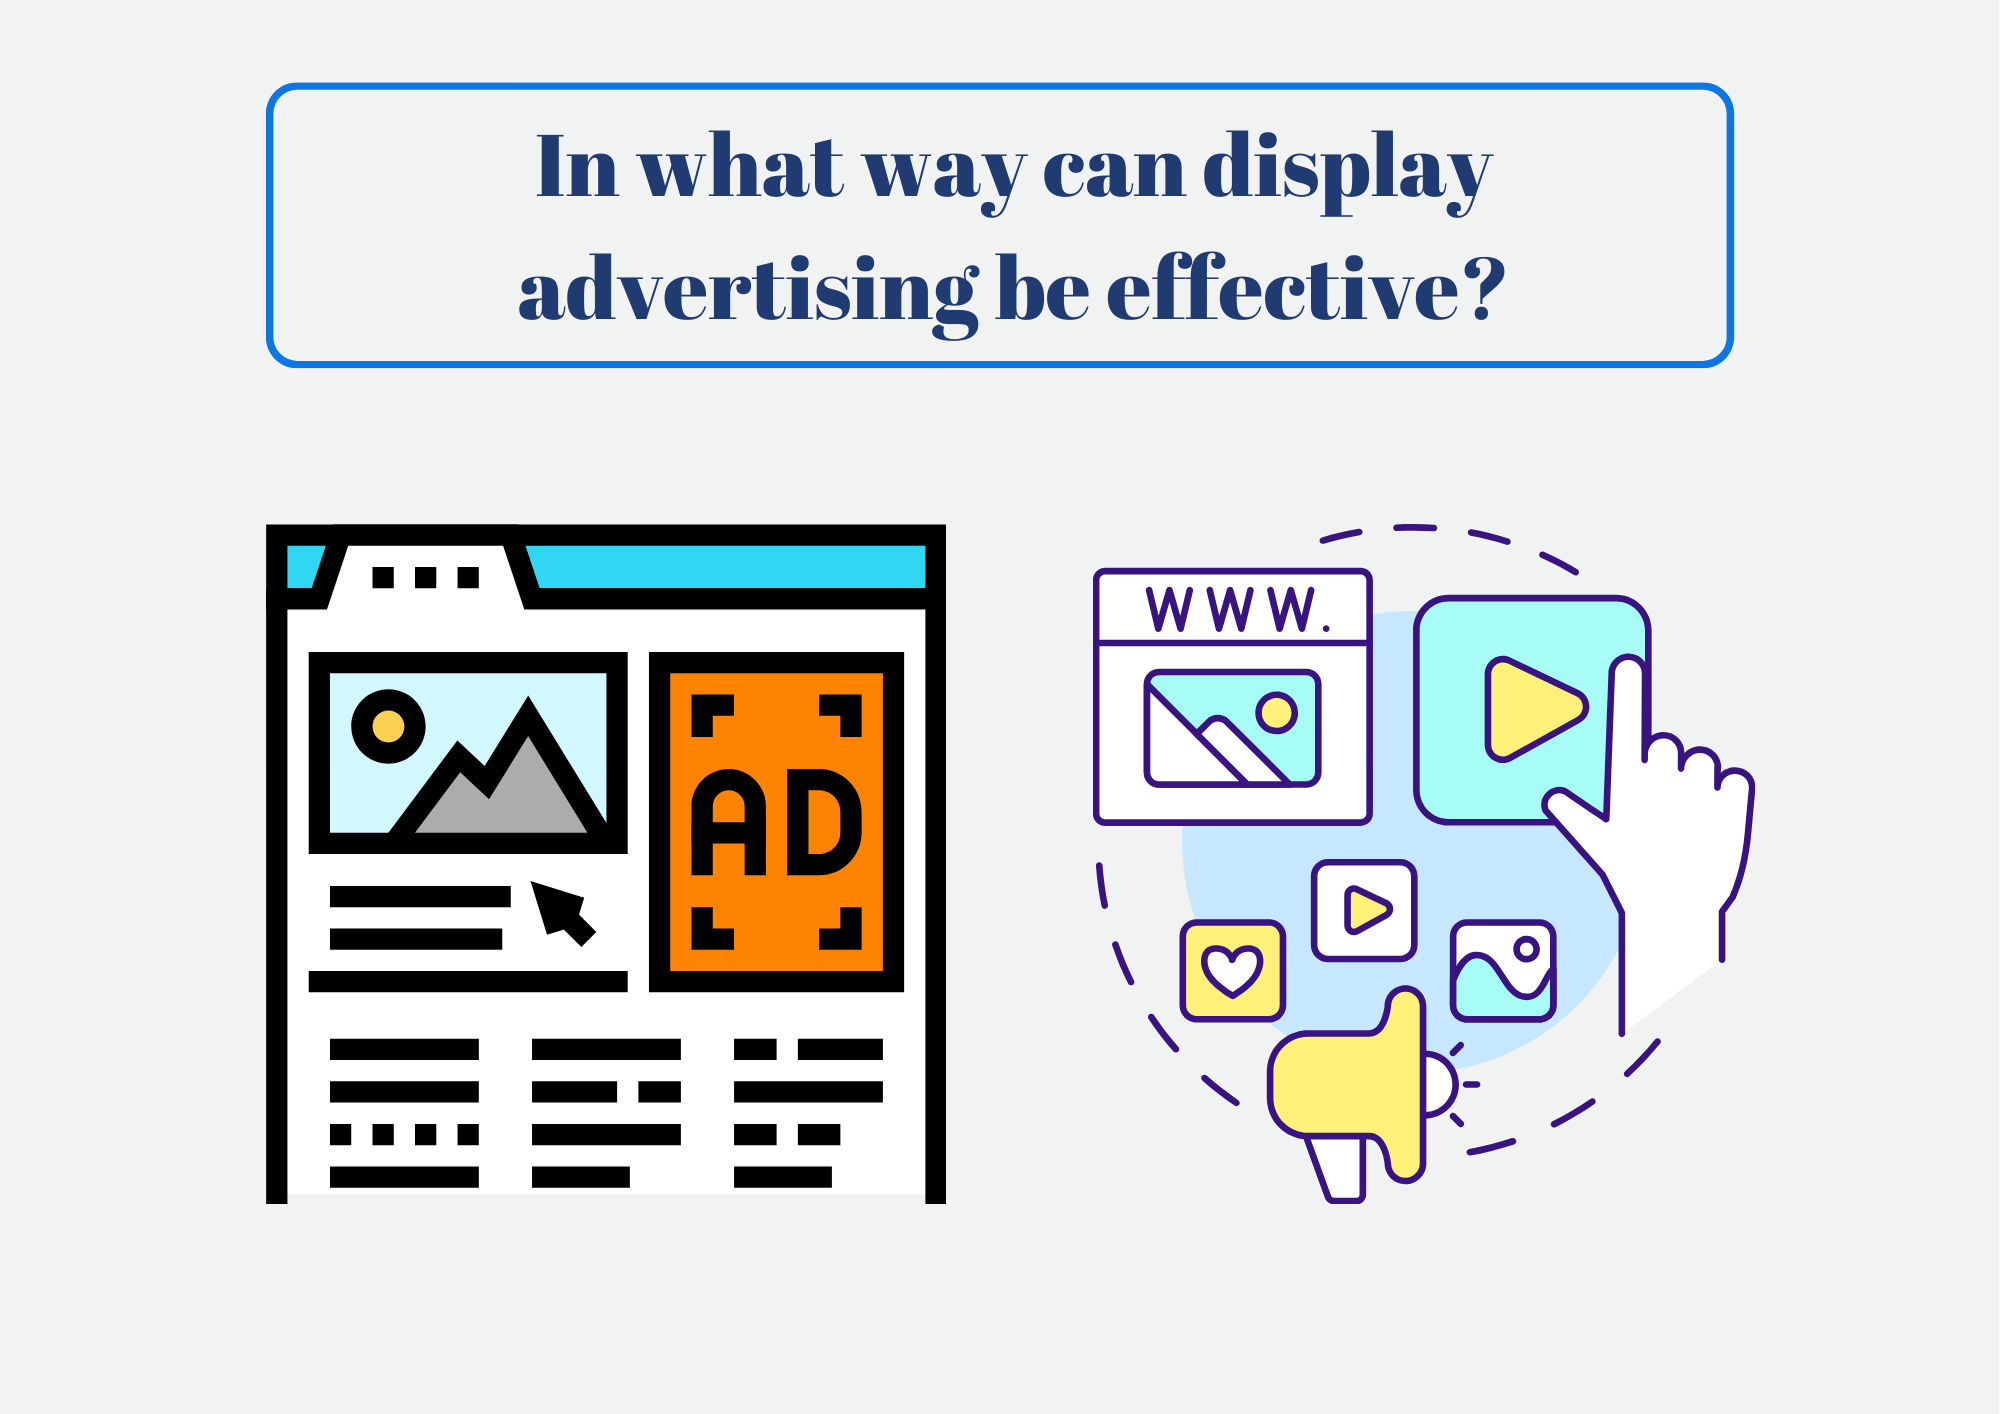 In what way can display advertising be effective?